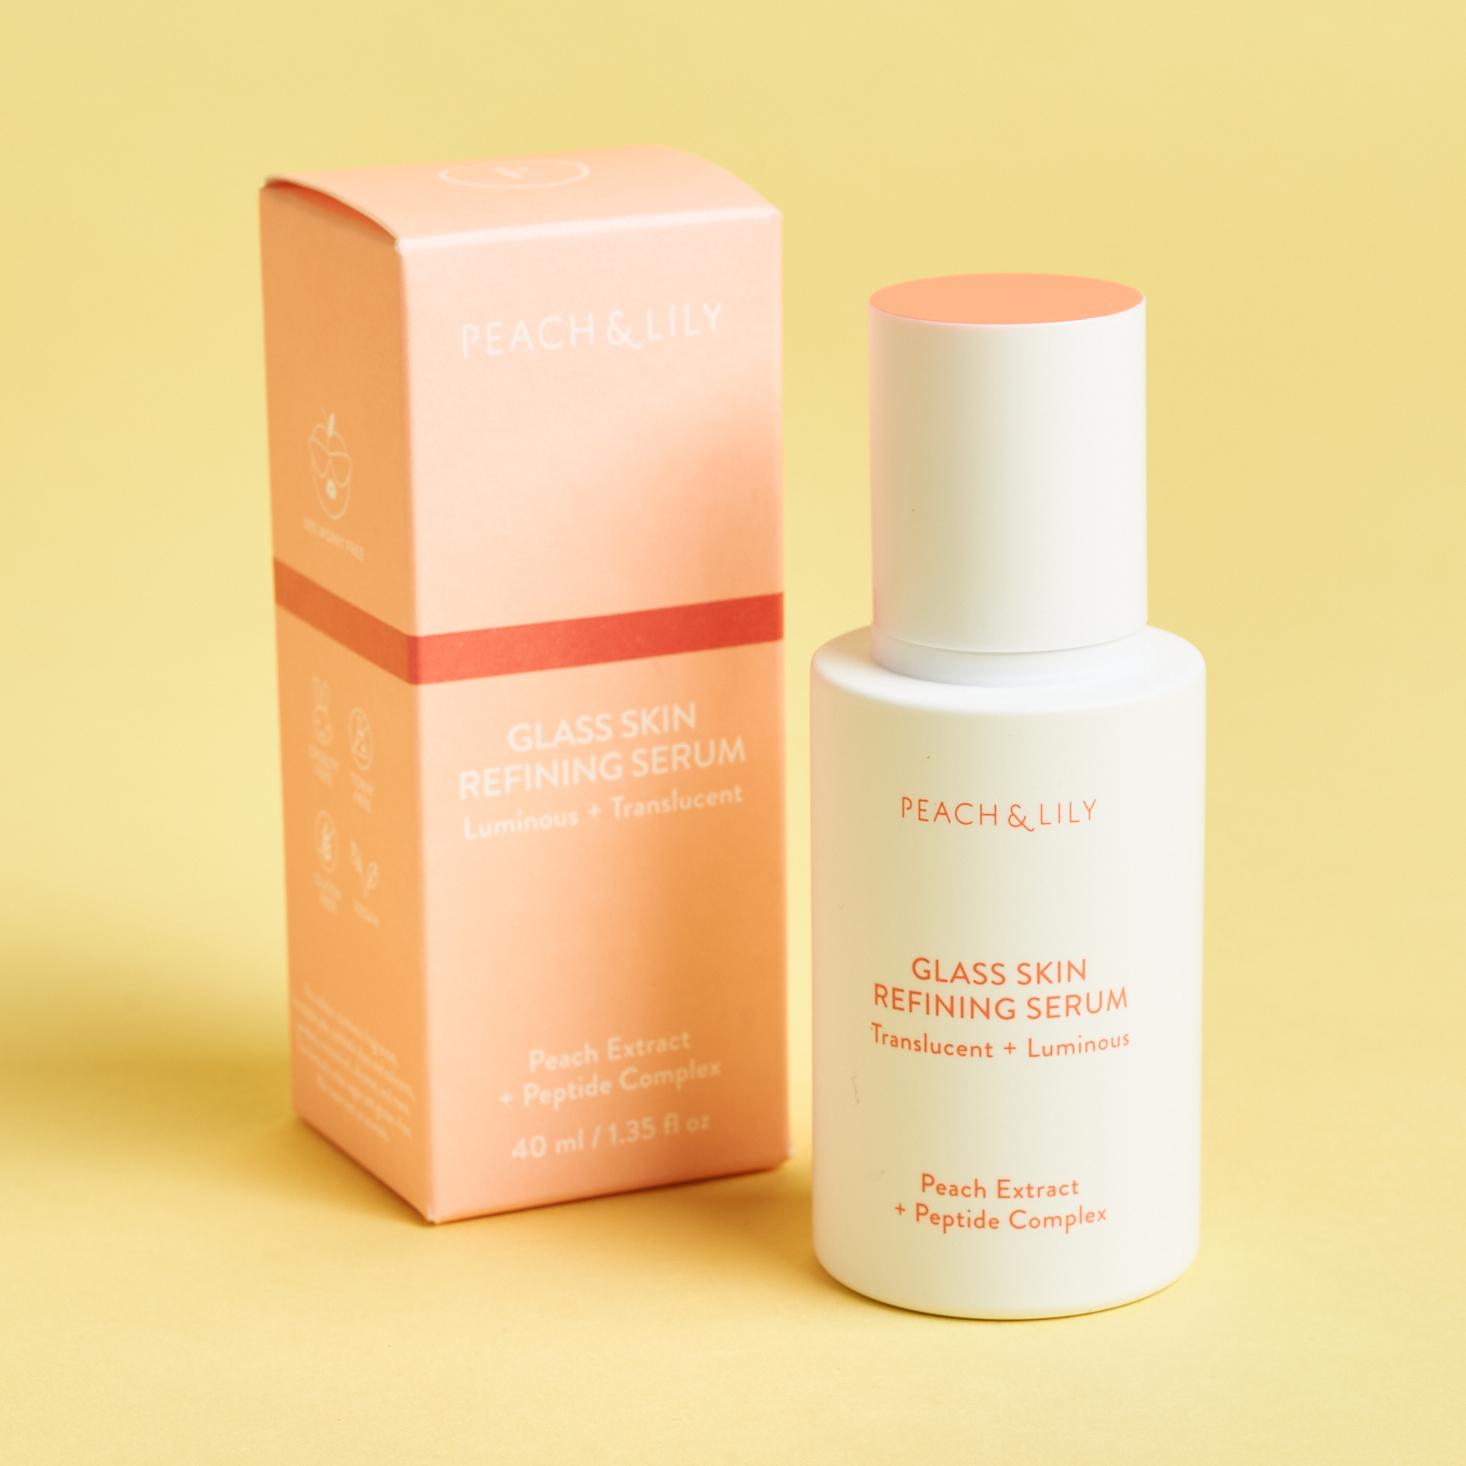 Peach & Lily Serum from Allure Beauty box.